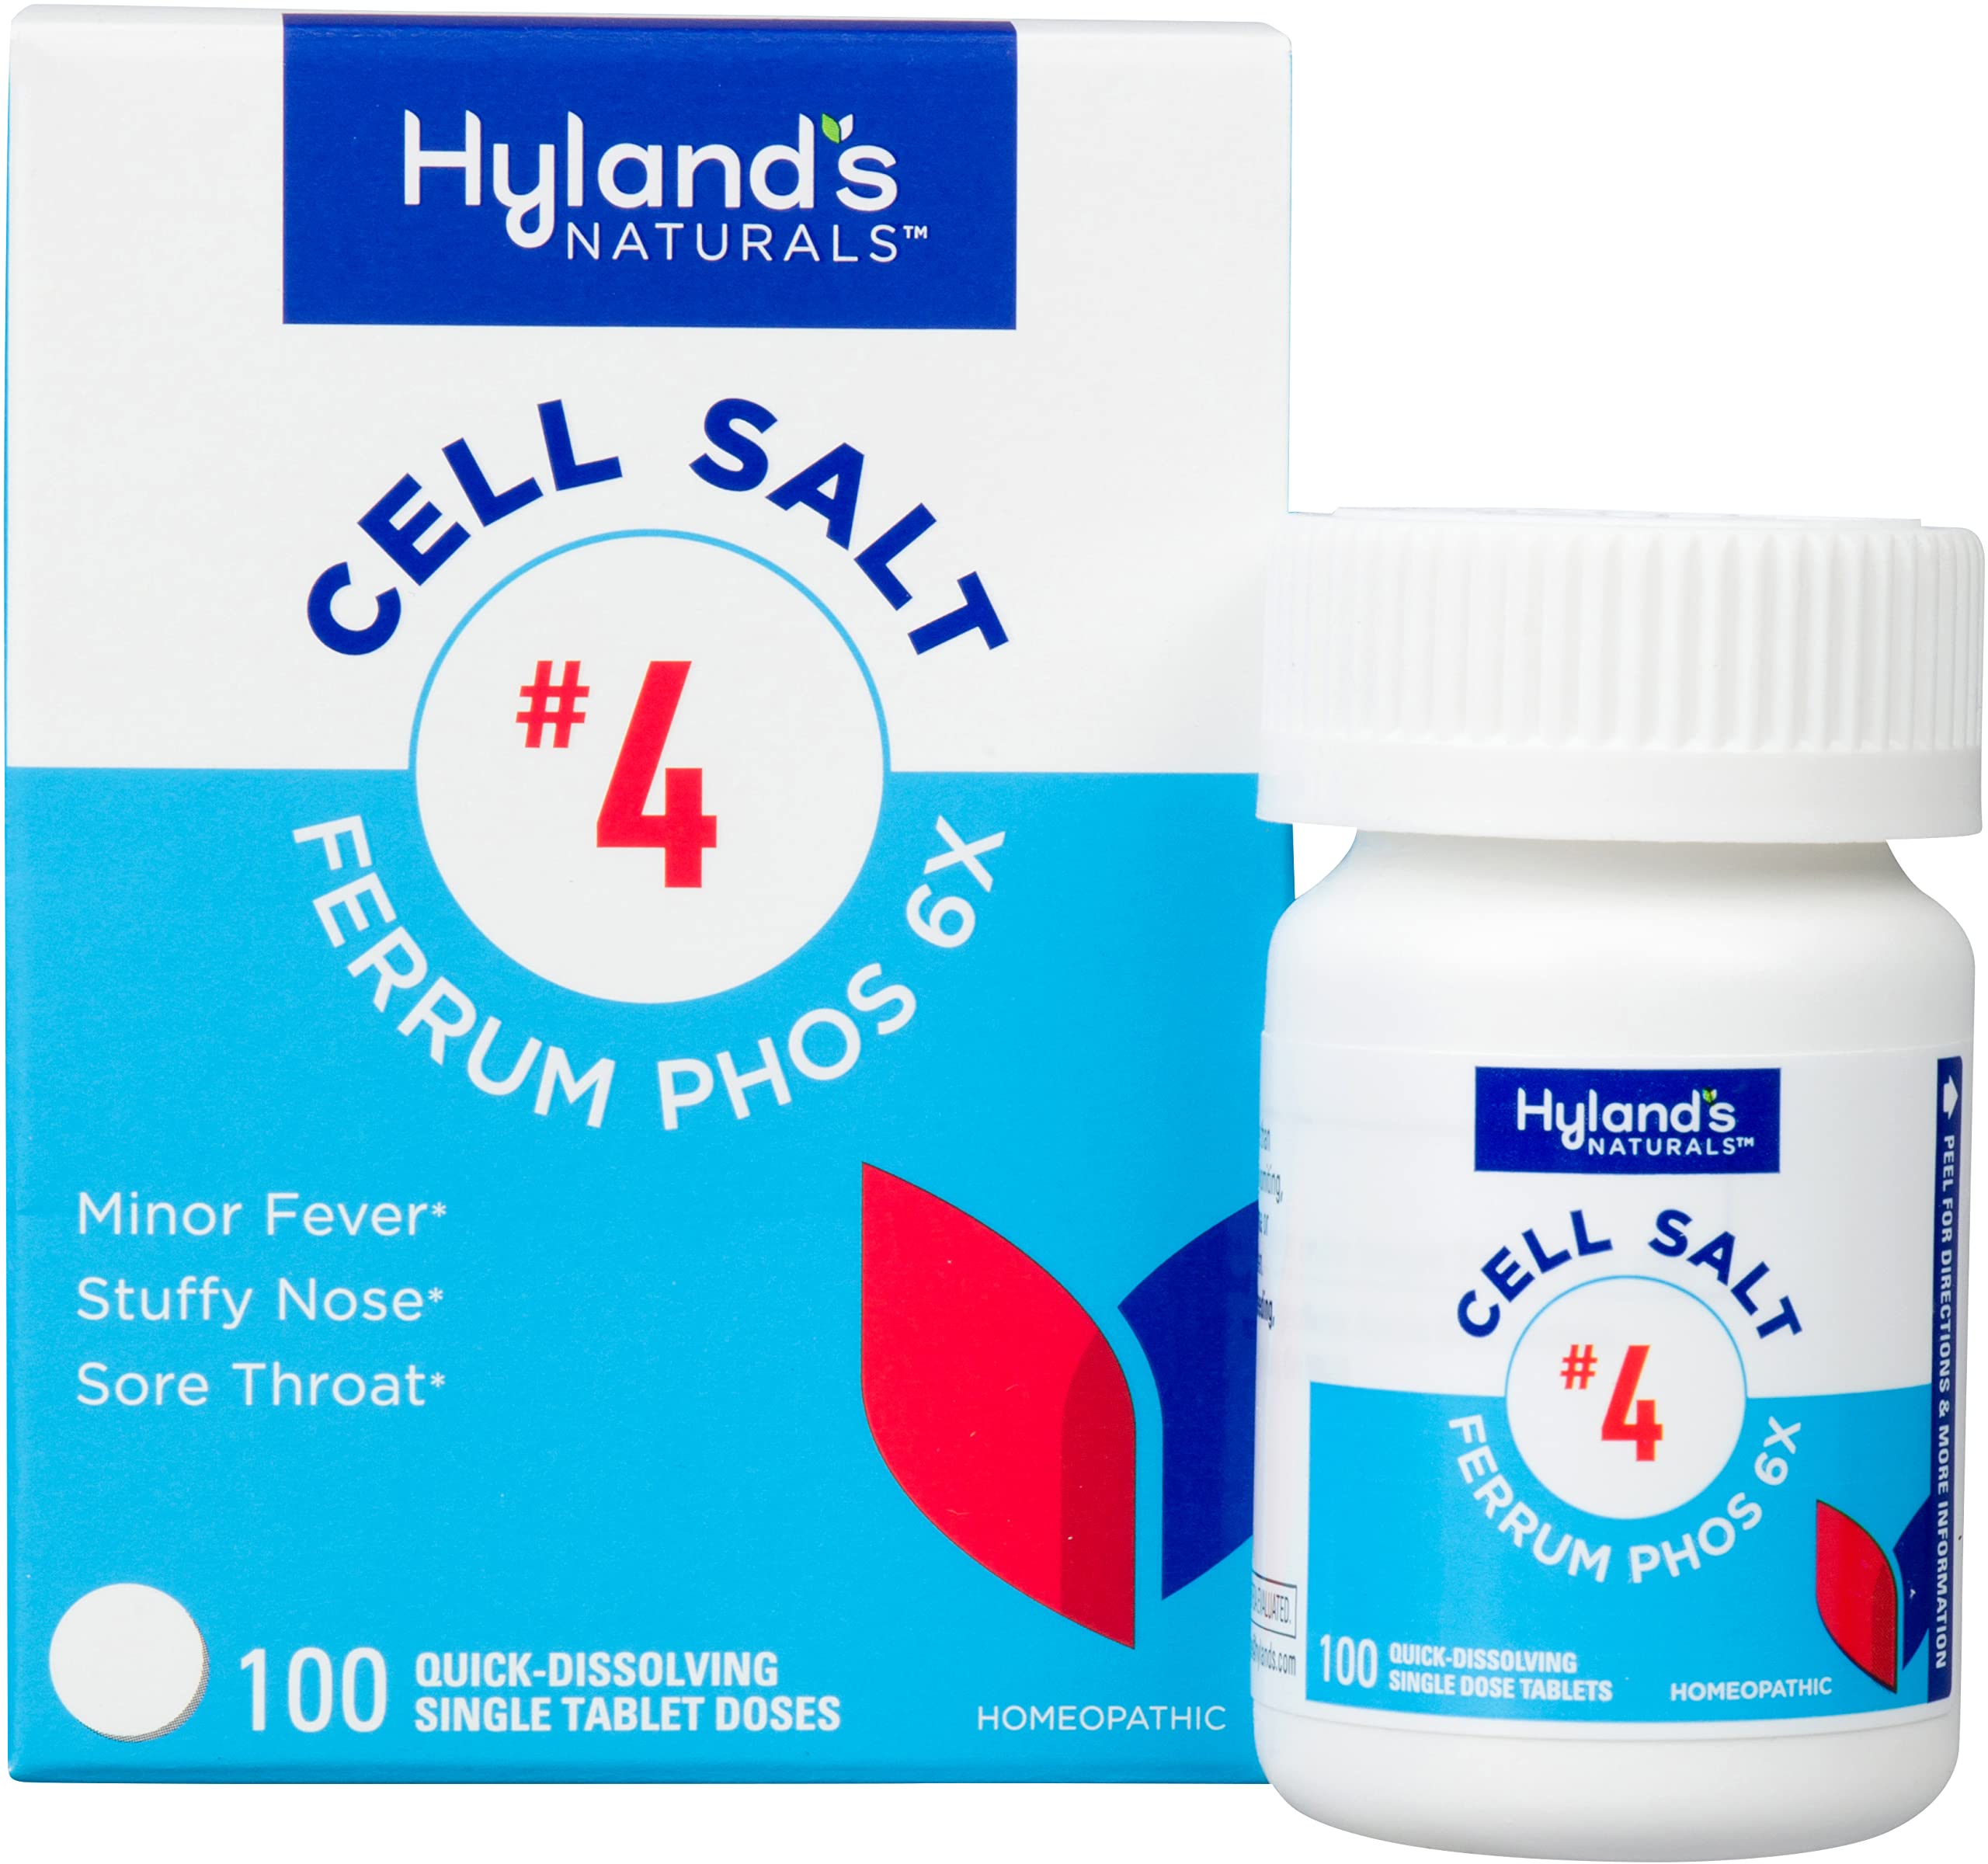 Hyland's Naturals No. 4 Cell Salt Ferrum Phos 6X Tablets, Decongestant and Sinus Relief, Inflammation Supplement, Natural Relief of Cold and Fever Symptoms, Quick Dissolving Tablets, 100 Count